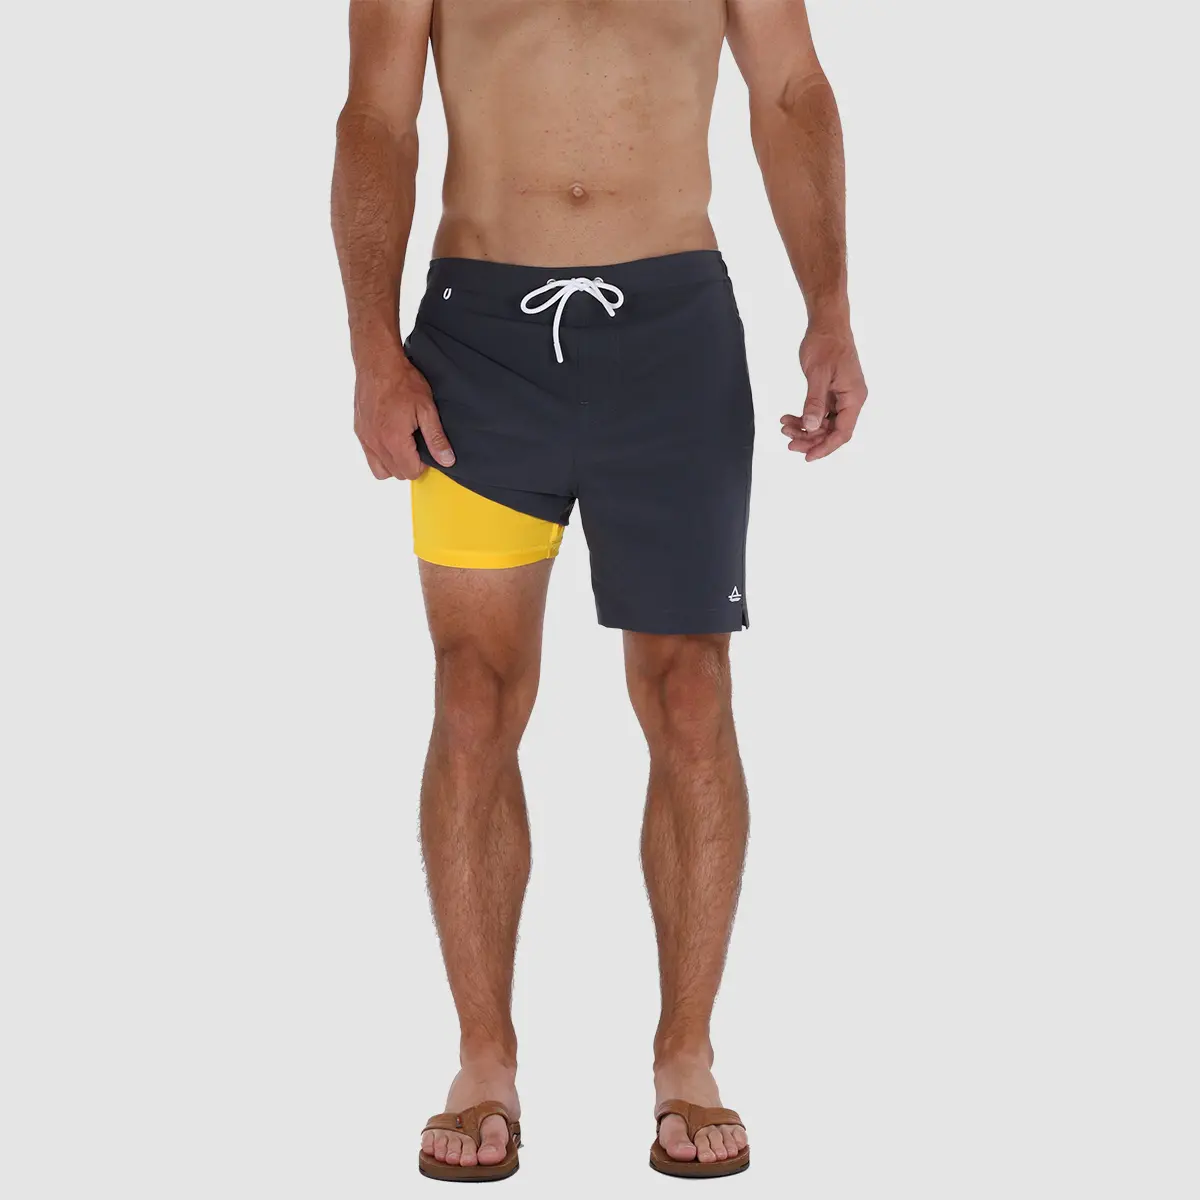 https://www.avalonsupply.com/wp-content/uploads/2022/08/mens-6-inch-inseam-swim-trunks-with-compression-liner-avalon-classics-charcoal-02.jpg